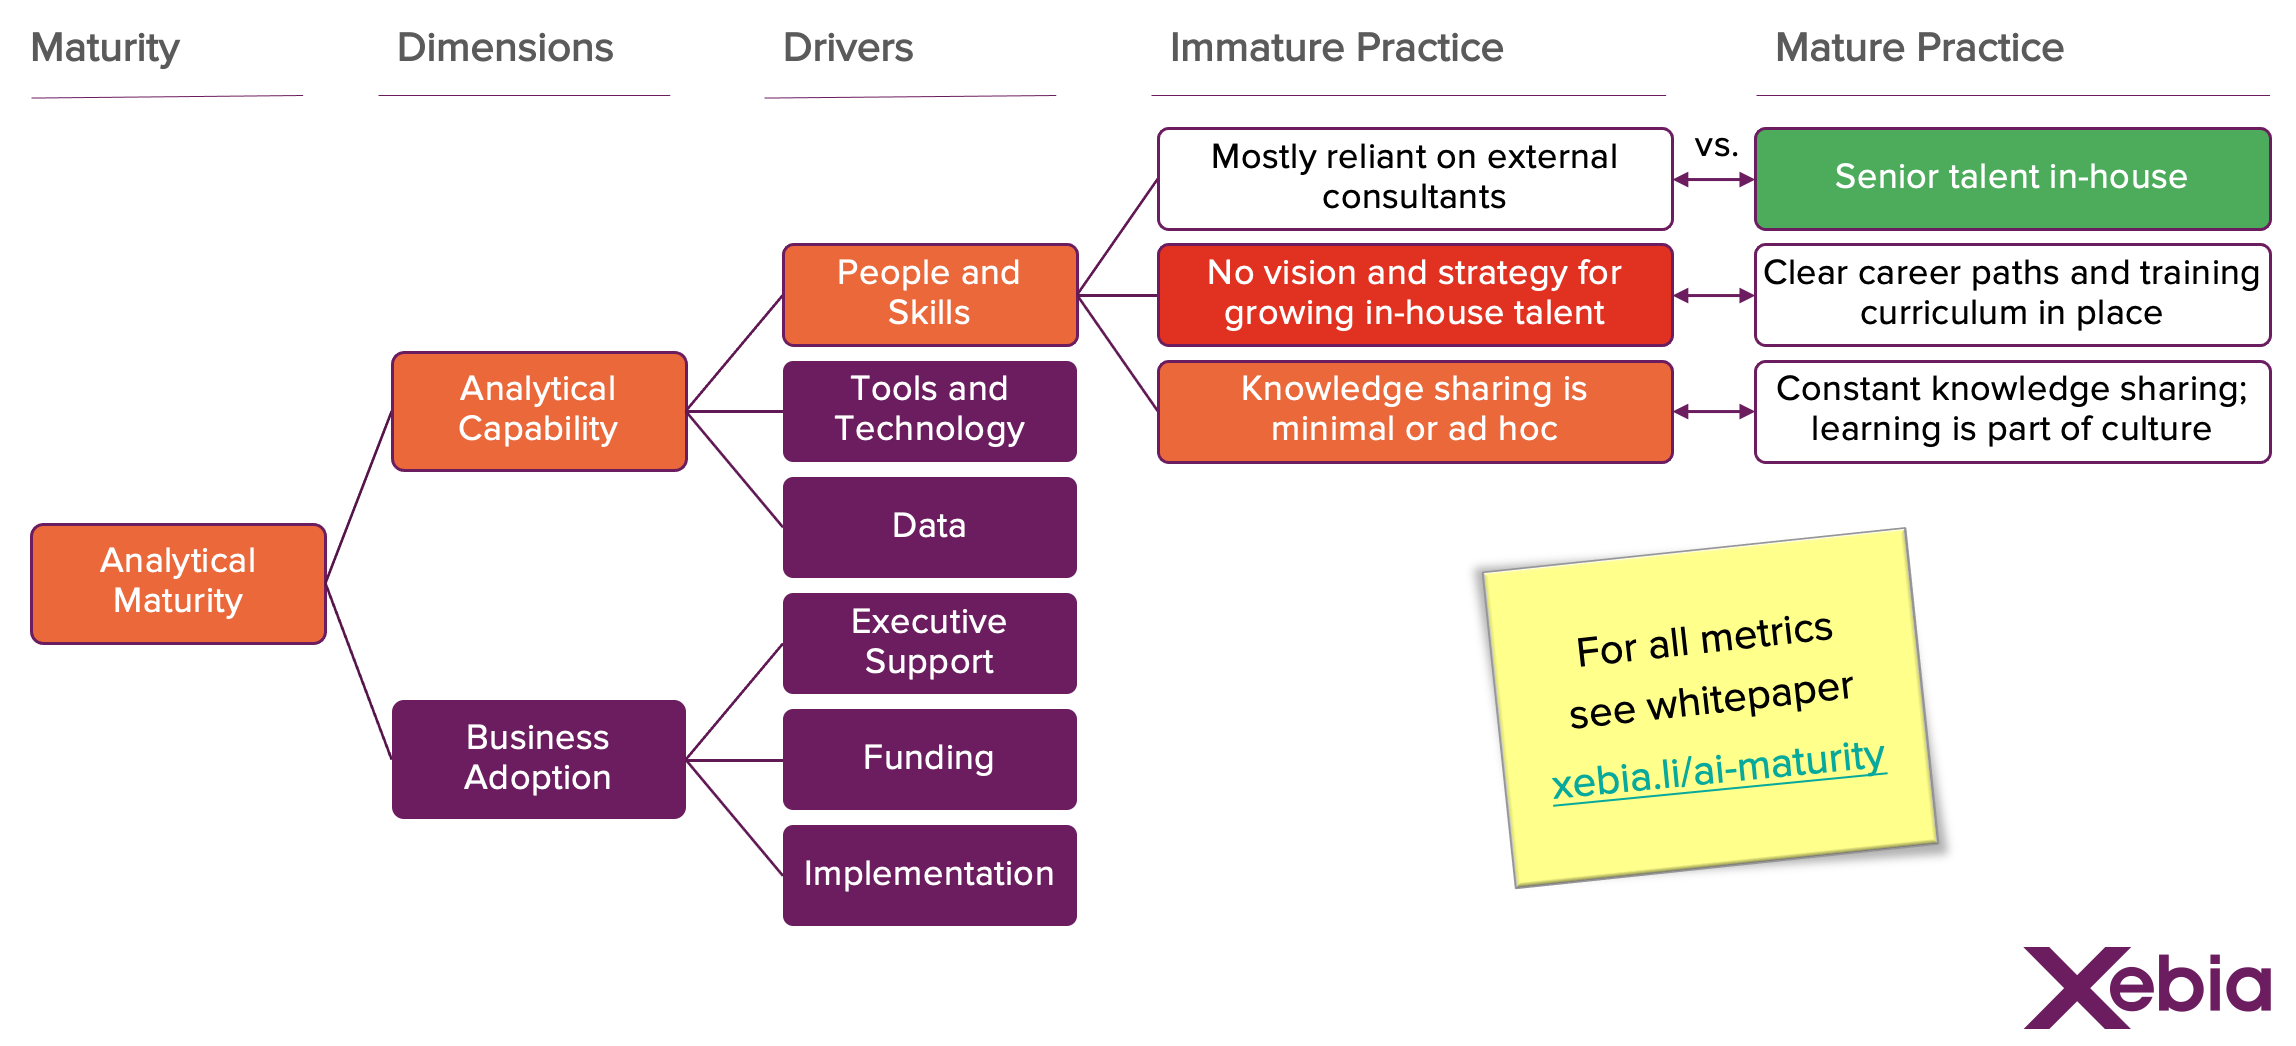 KPI driver tree showing examples of immature and mature AI practice and how it rolls up to the final AI maturity score